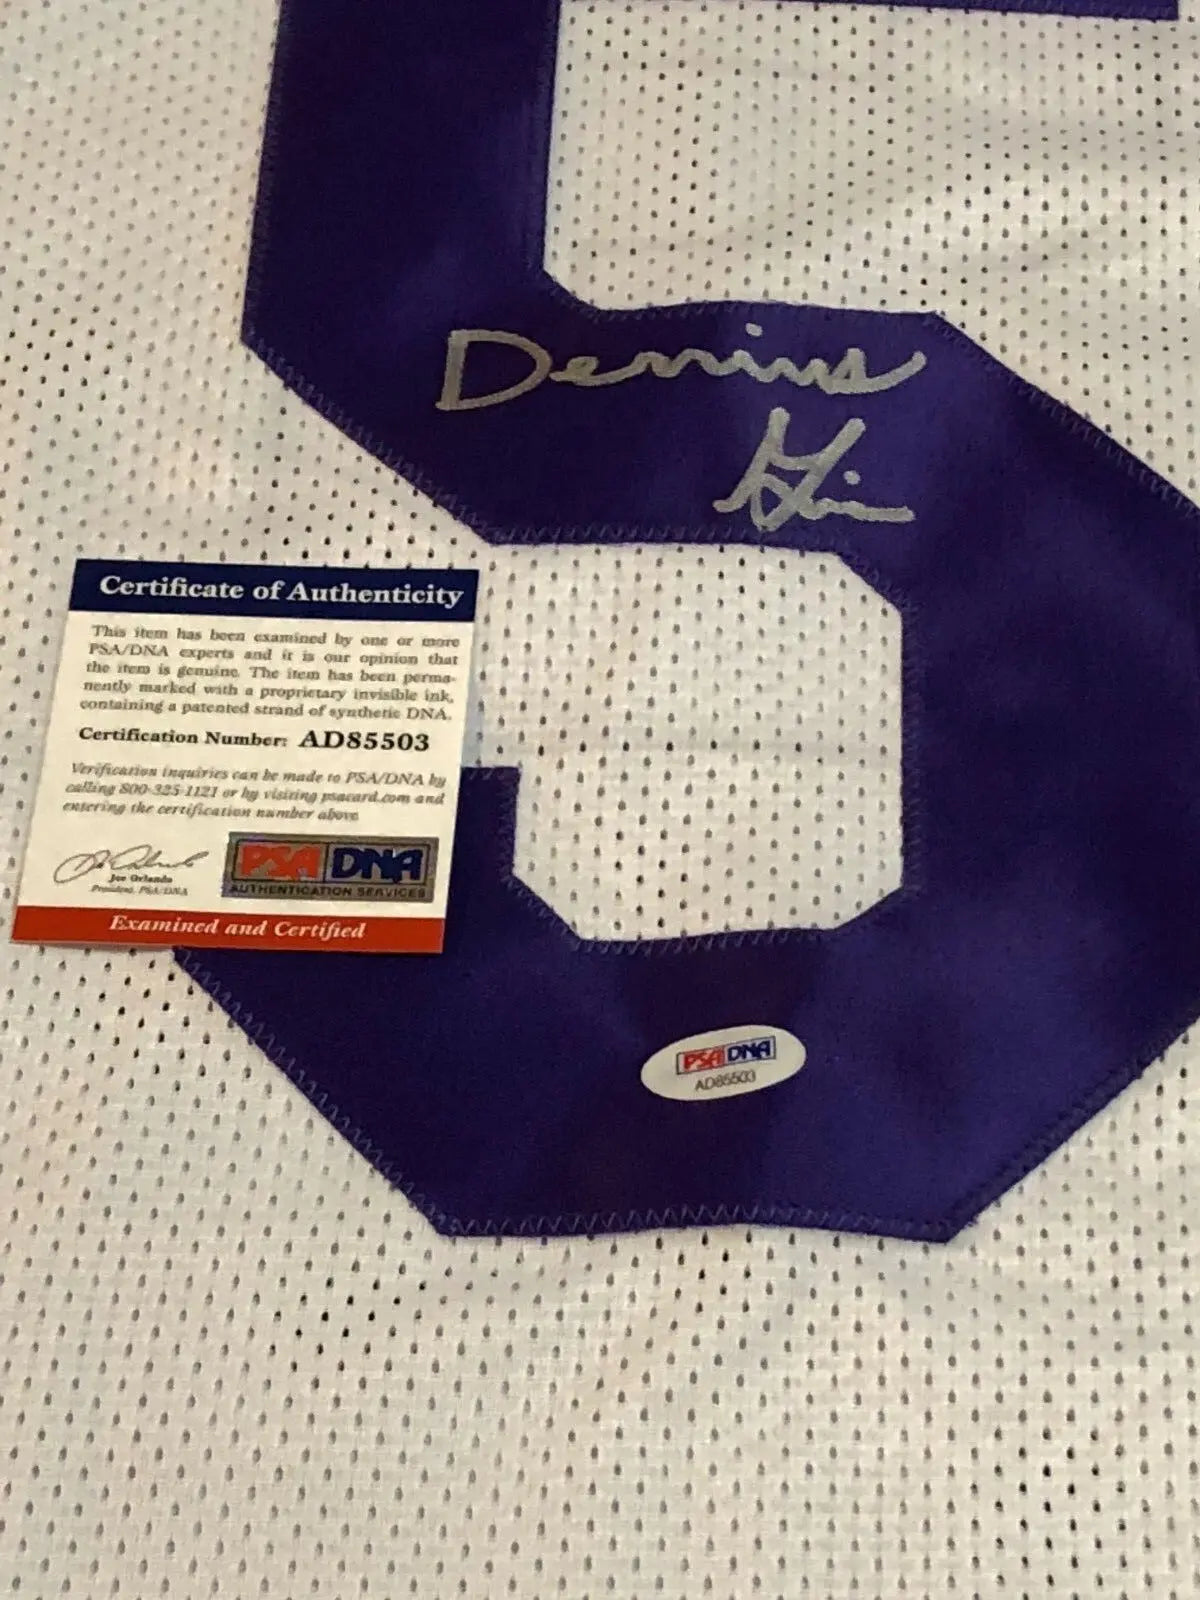 MVP Authentics Lsu Tigers Derrius Guice Autographed Signed Jersey Psa  Coa 116.10 sports jersey framing , jersey framing